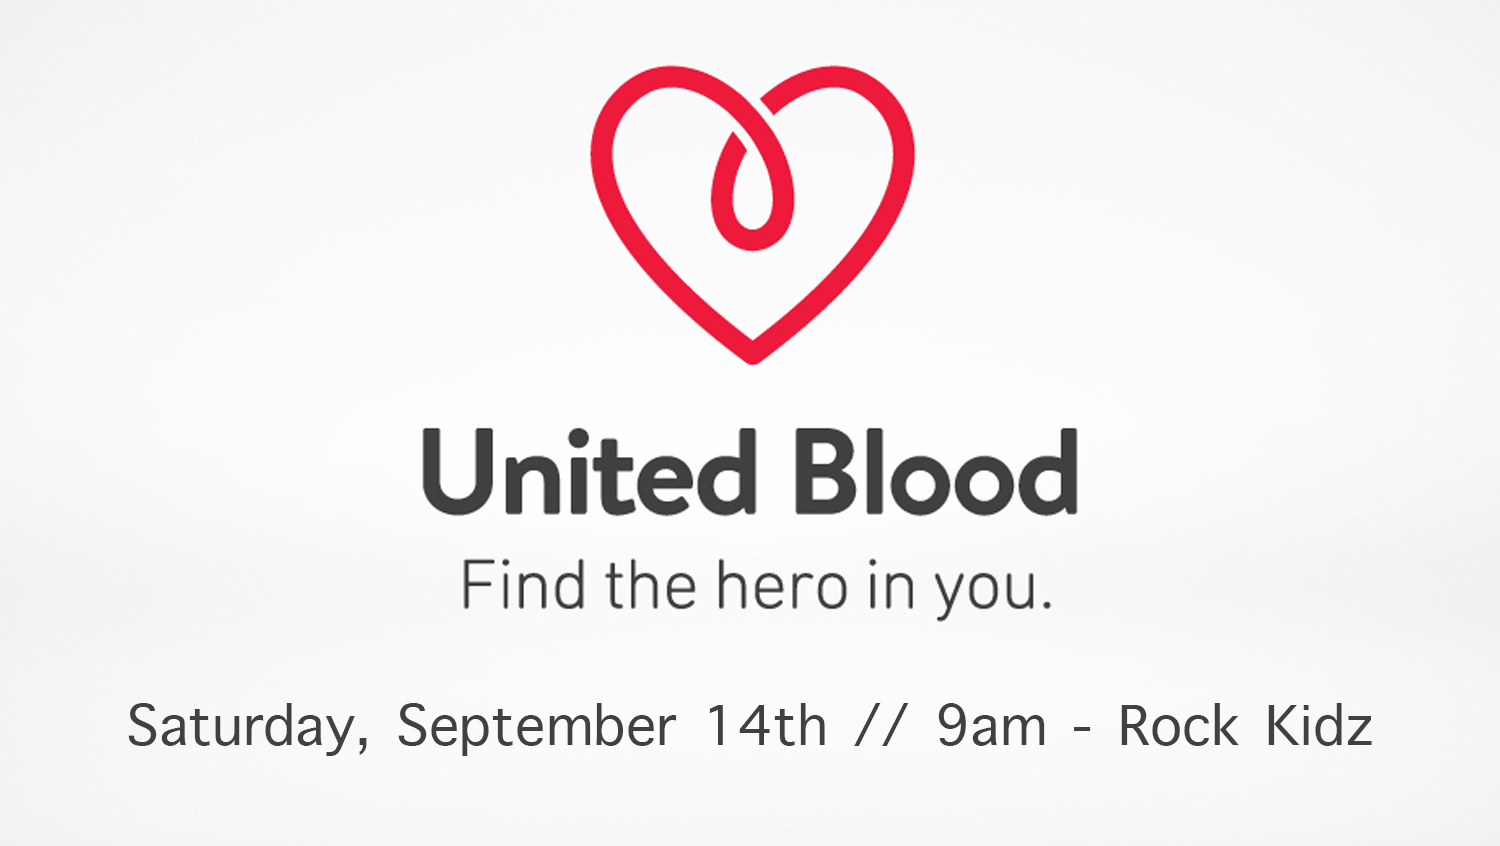 united blood service uses random numbers to call you